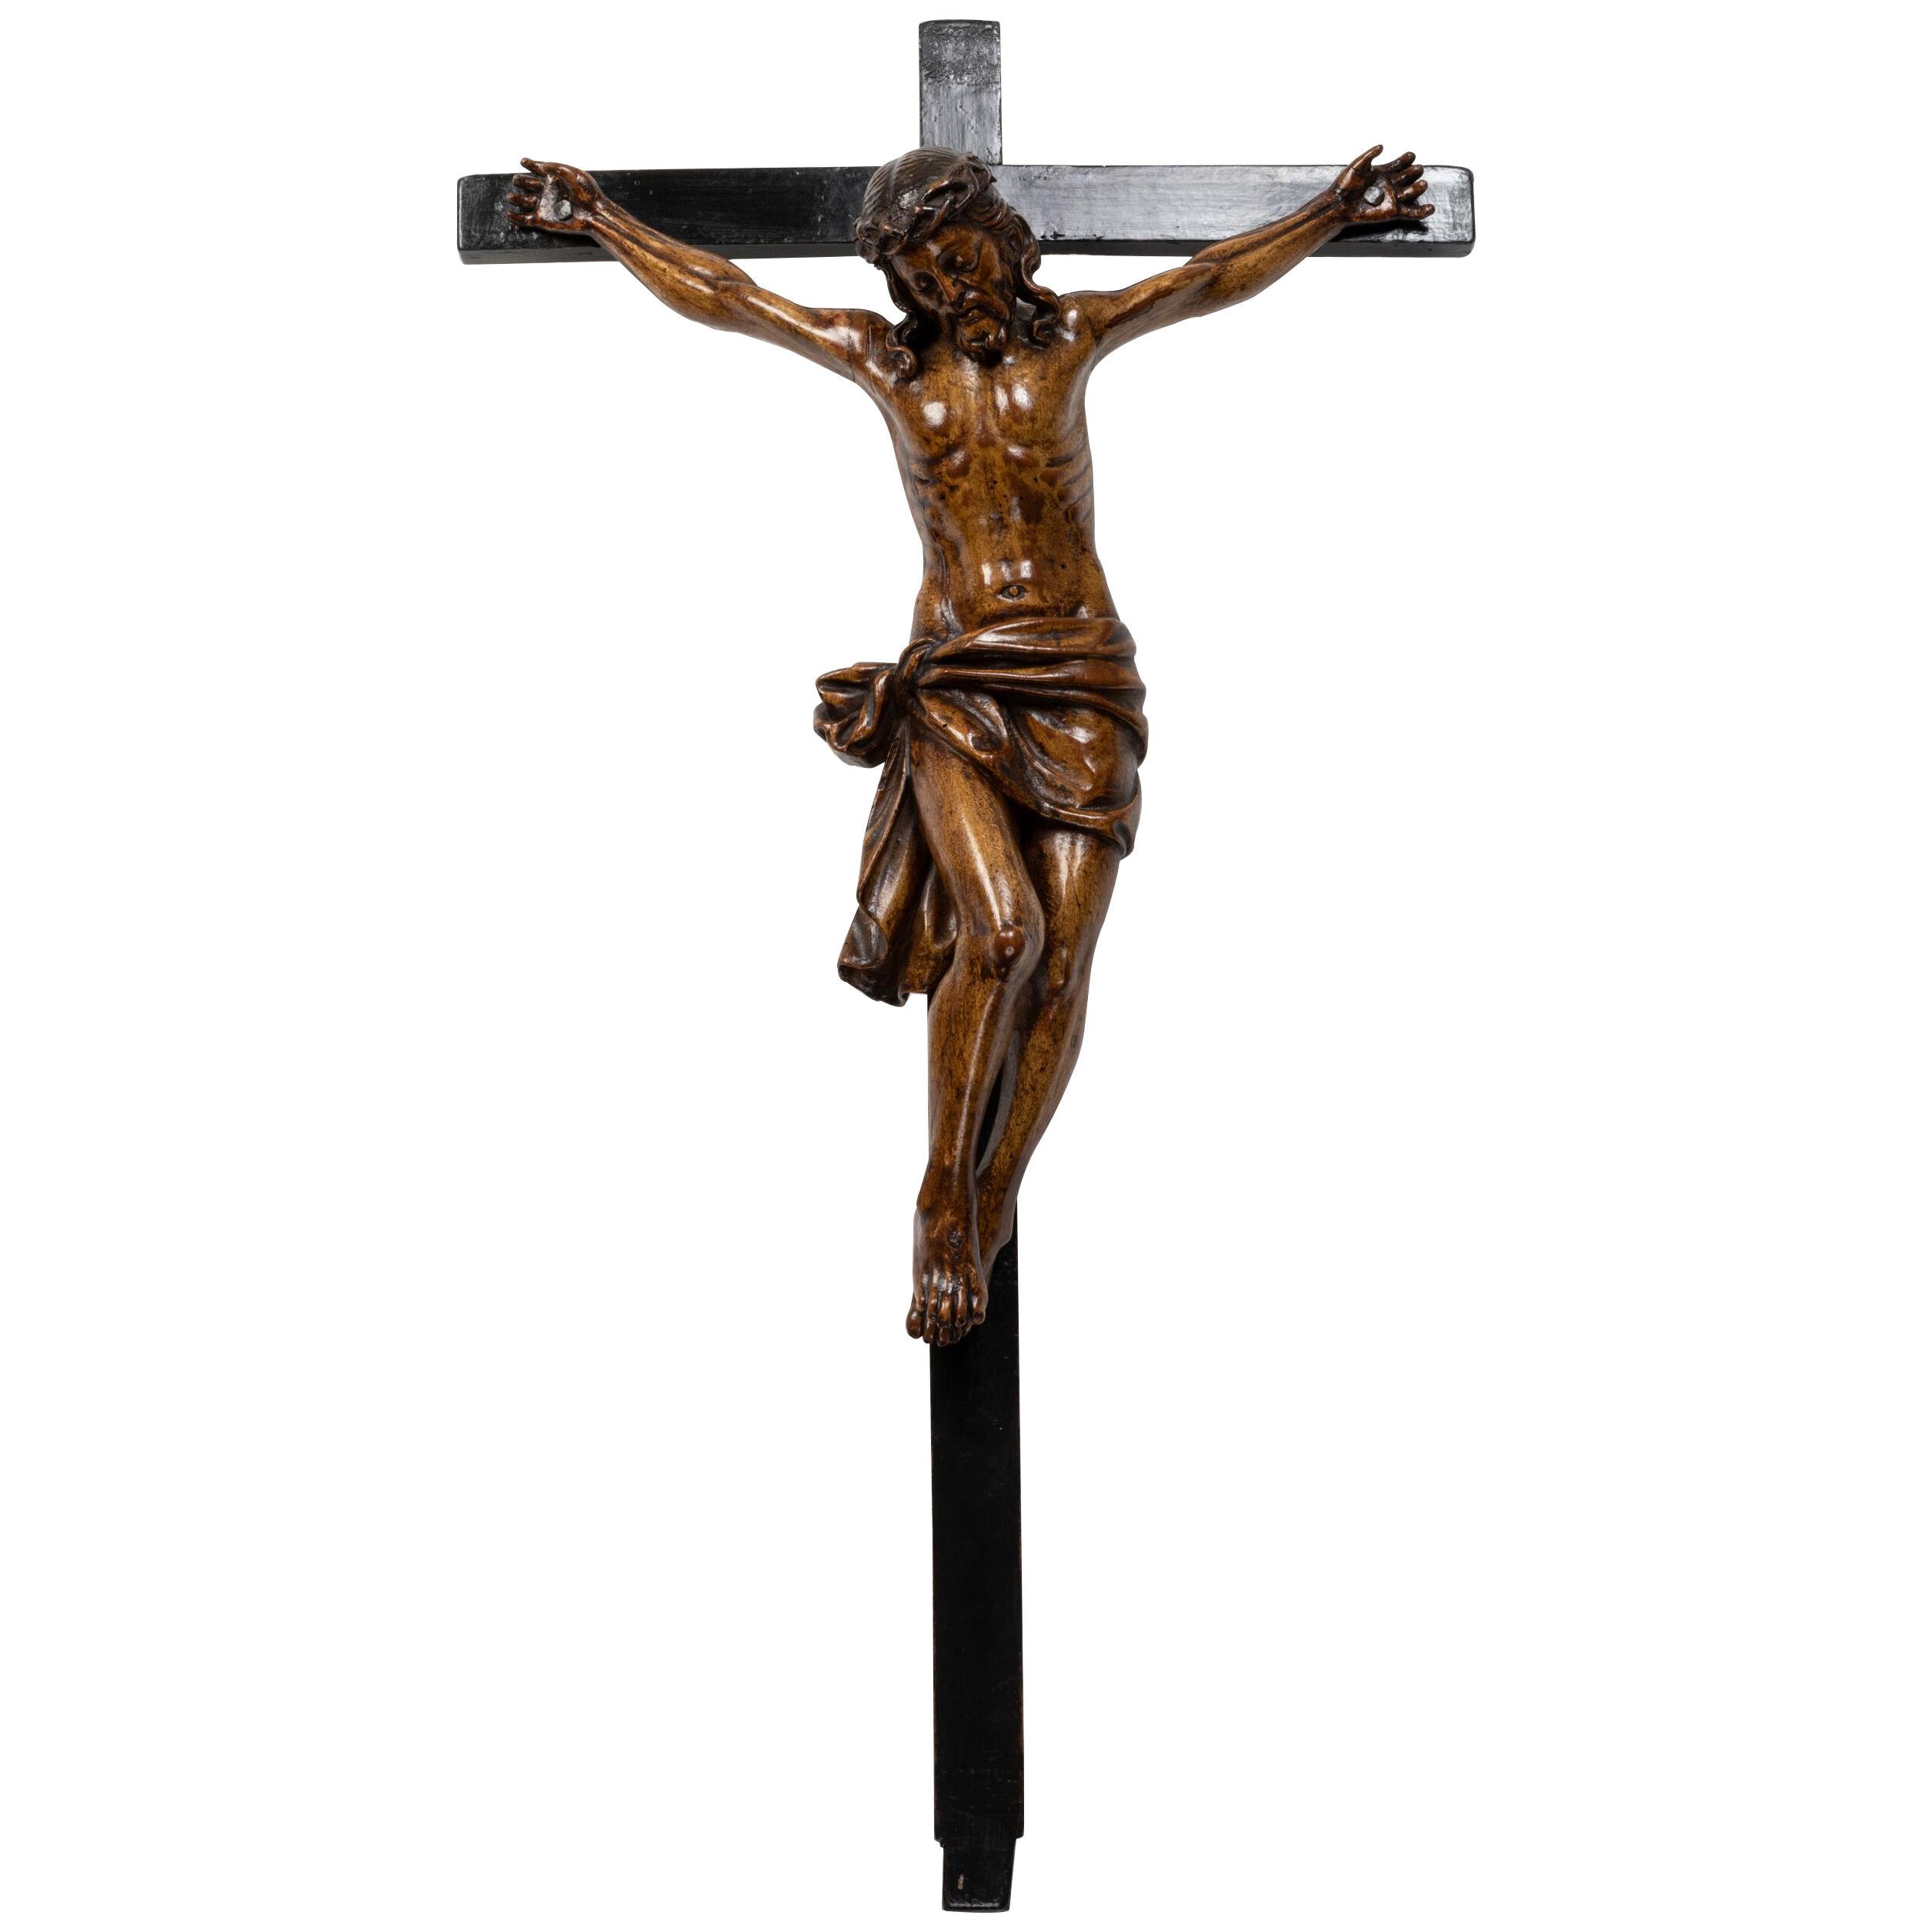 Crucifix made of walnut and poplar wood - Southern Italy - early 17th century •